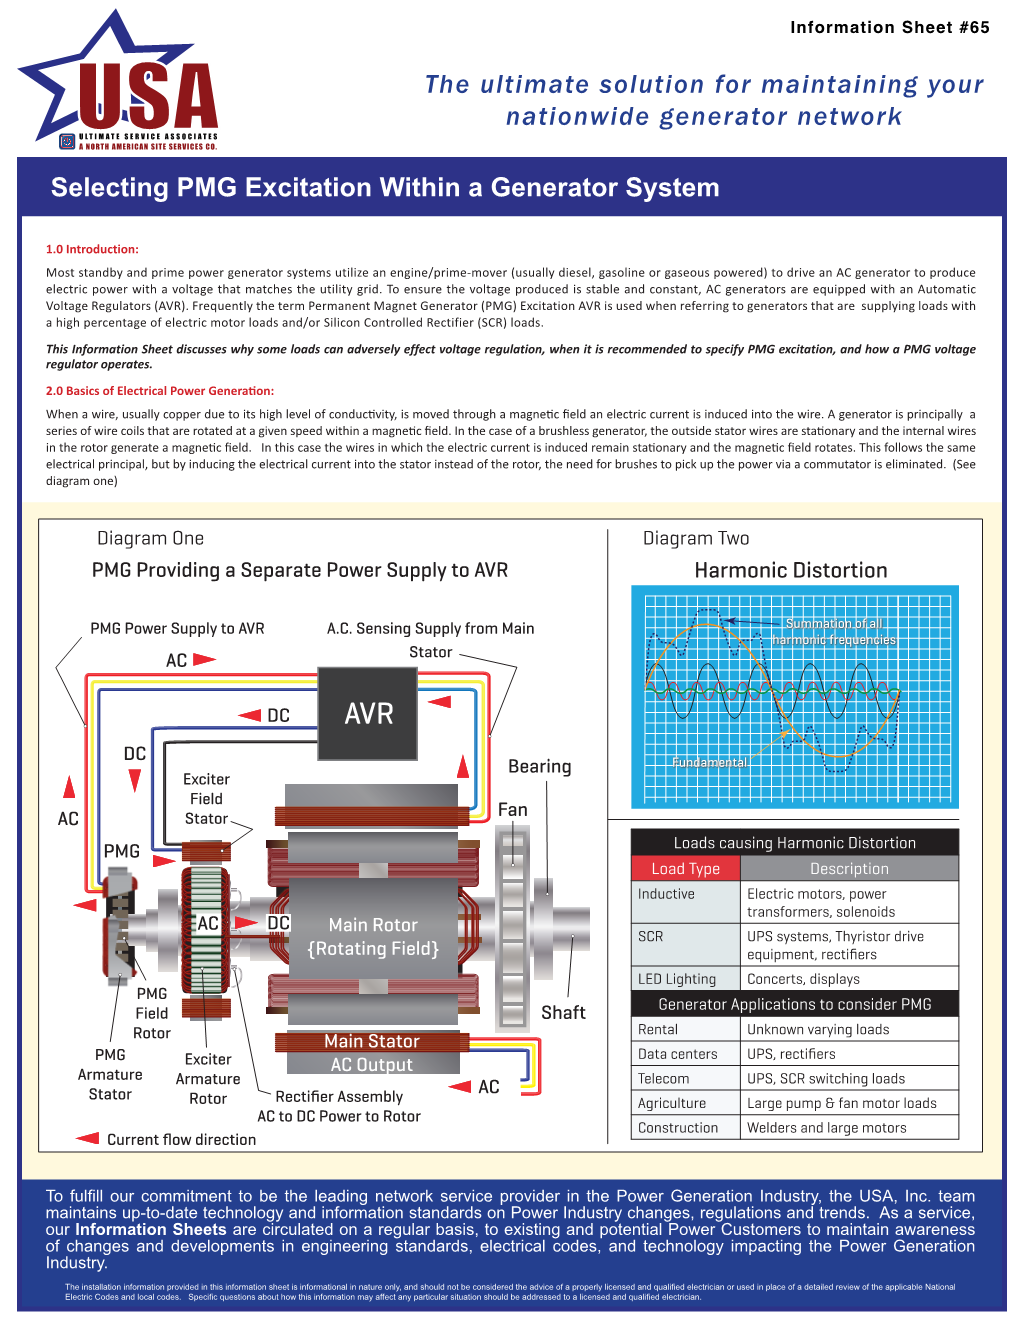 Selecting PMG Excitation Within a Generator System the Ultimate